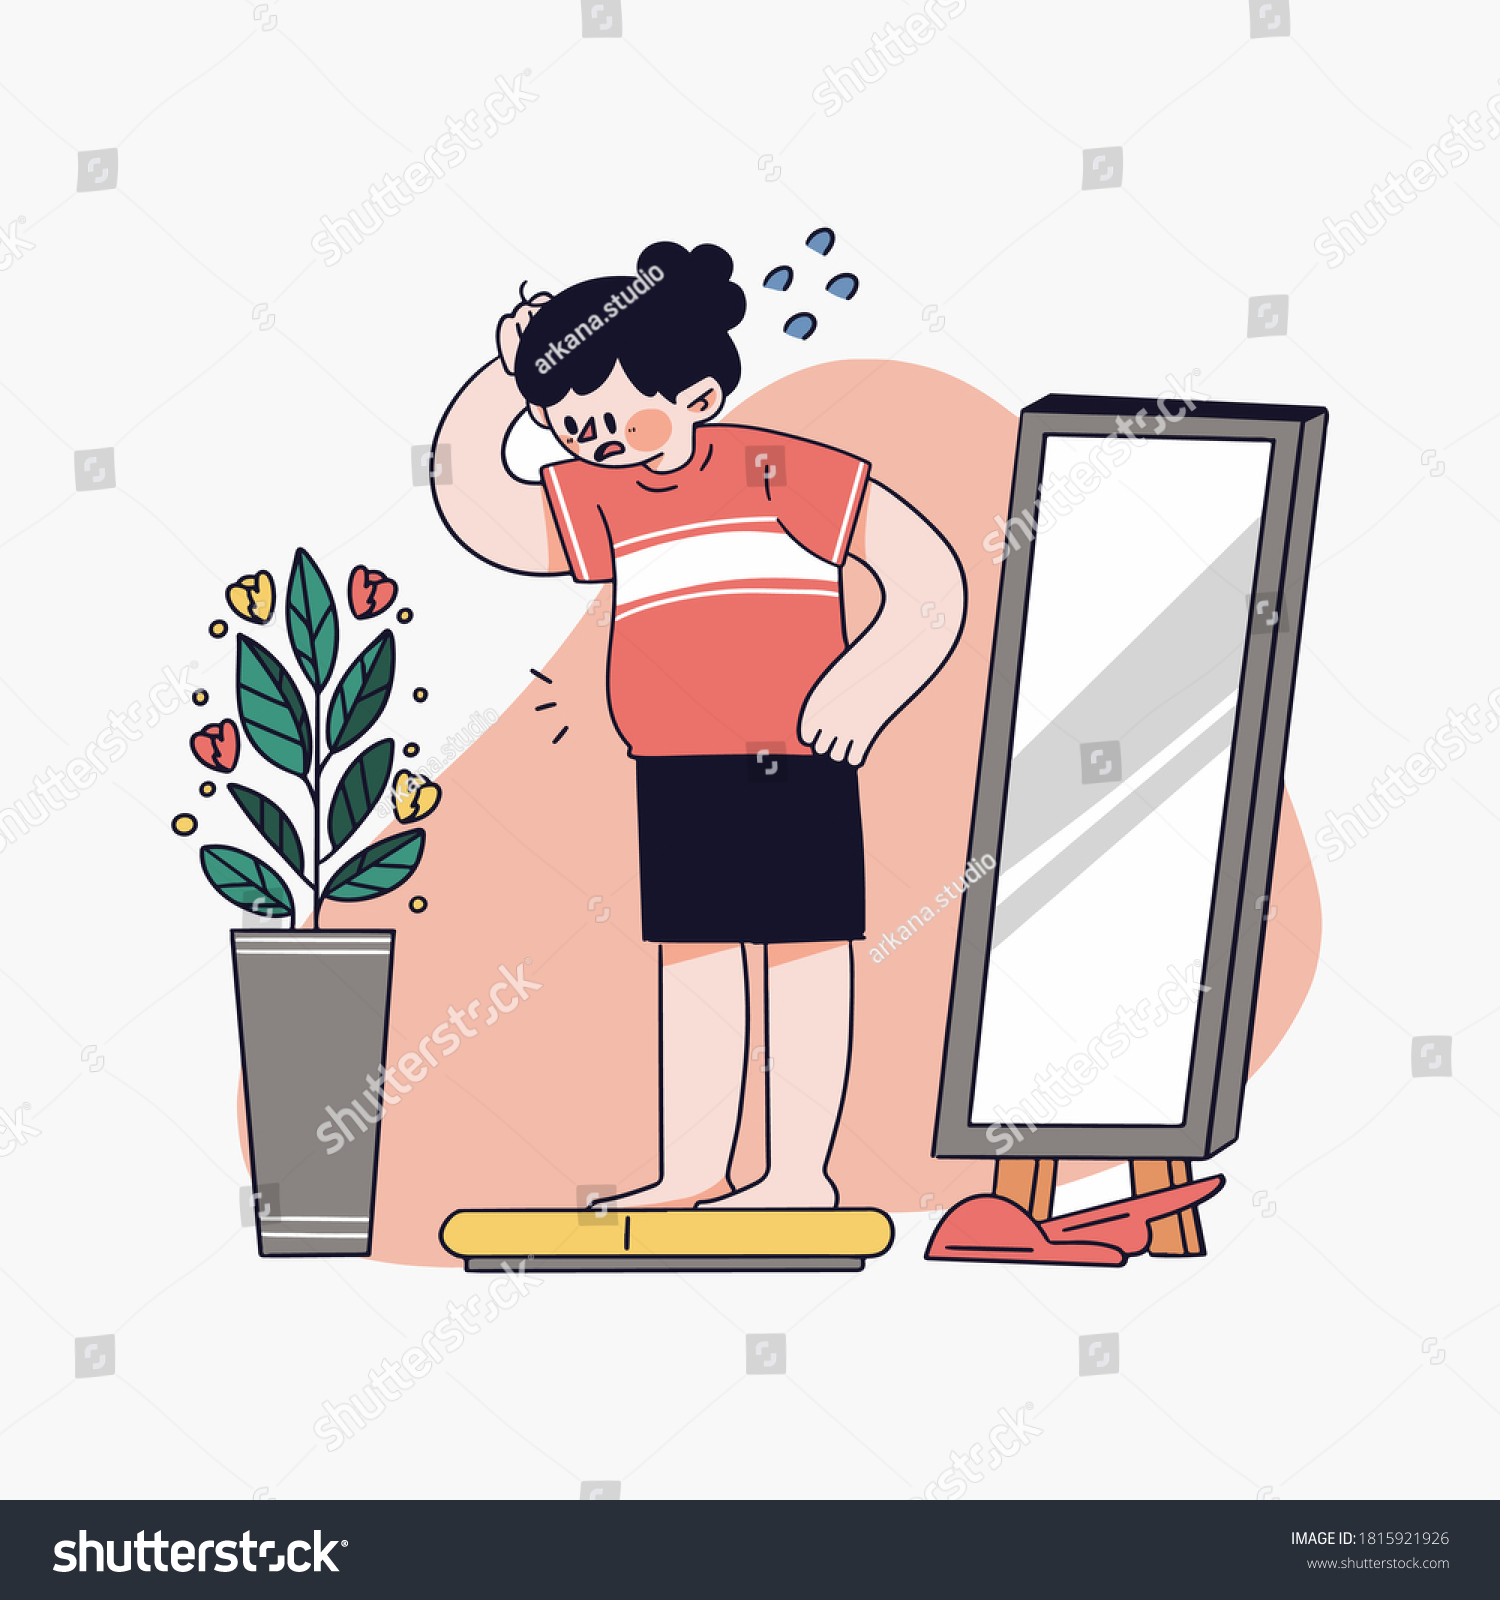 Oops Girl Gain Weight Concept Vector Digital Illustration #1815921926